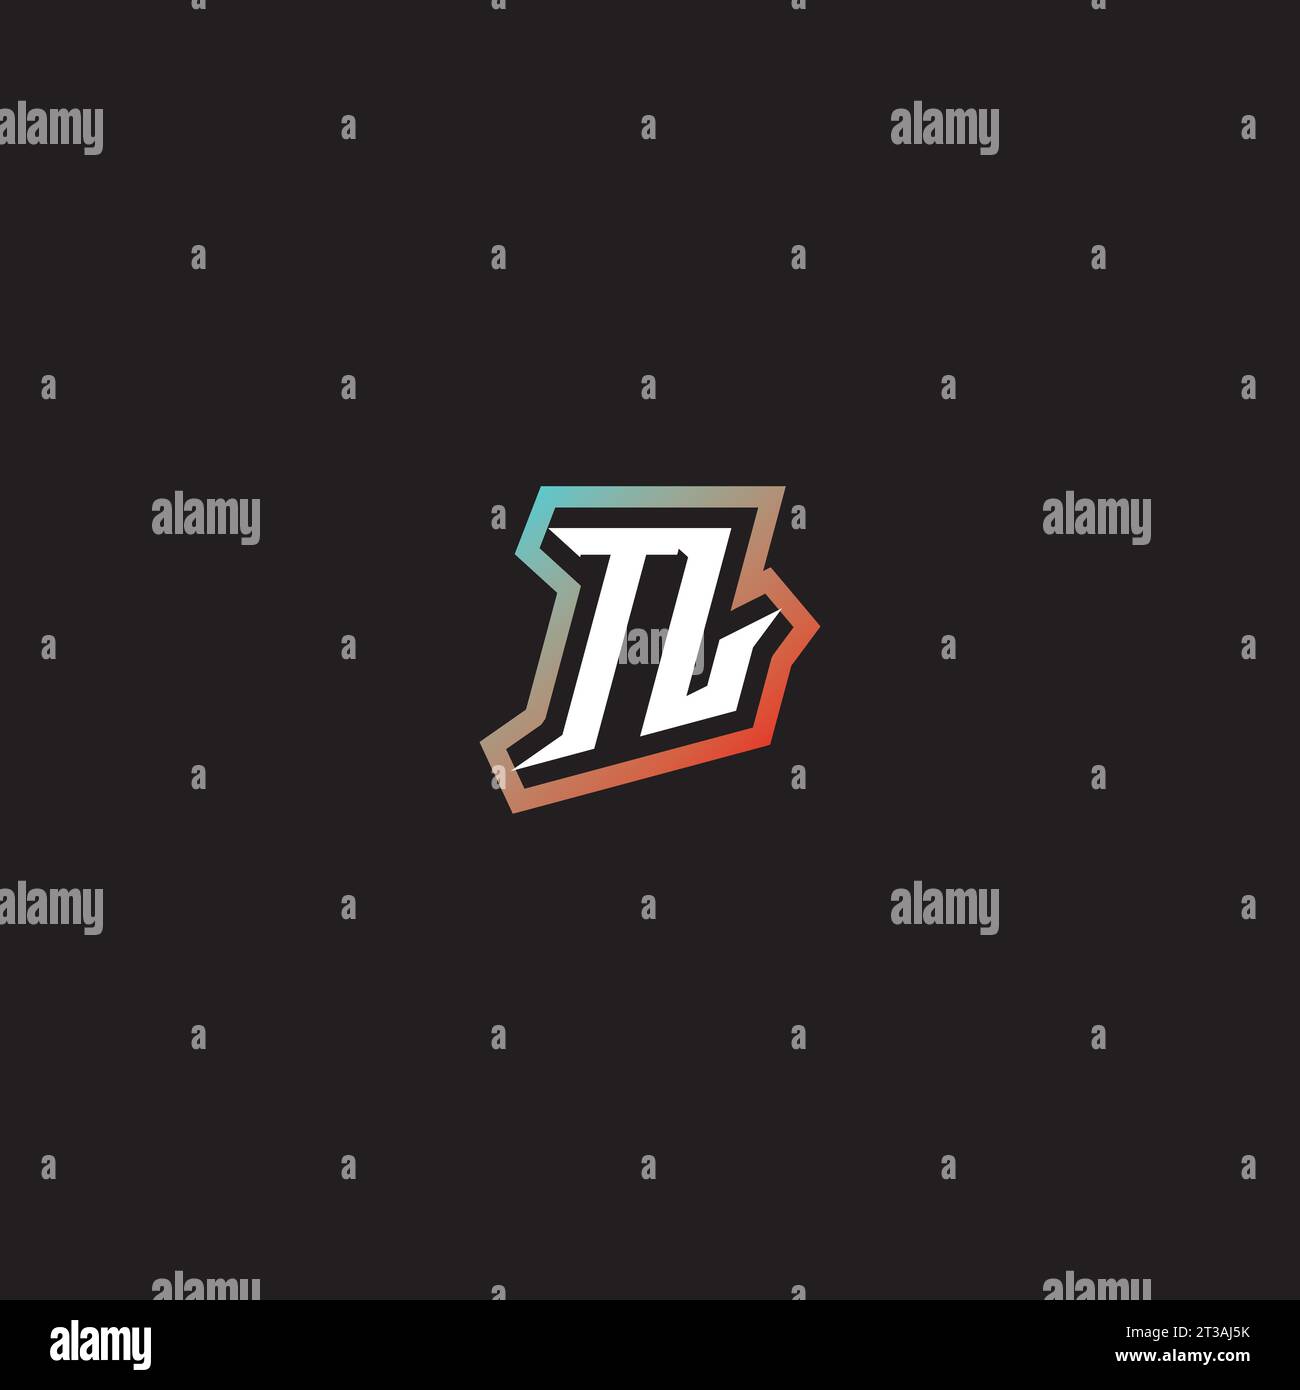 TL letter combination cool logo esport initial and cool color gradattion ideas Stock Vector